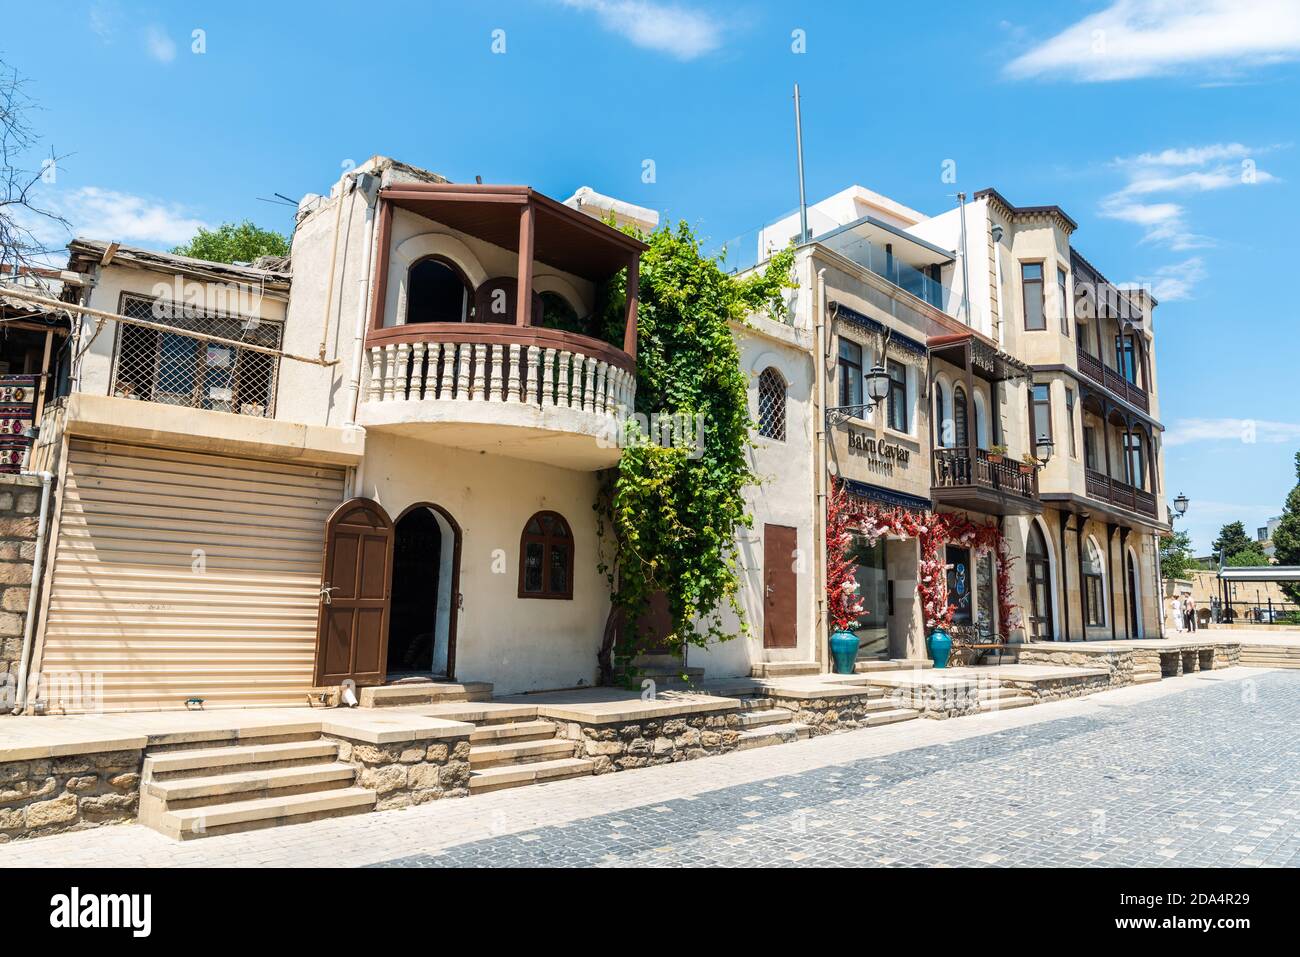 Baku, Azerbaijan – August 5, 2020. Historic building housing commercial and residential properties on Zeynalli street in the Icheri Sheher old city of Stock Photo